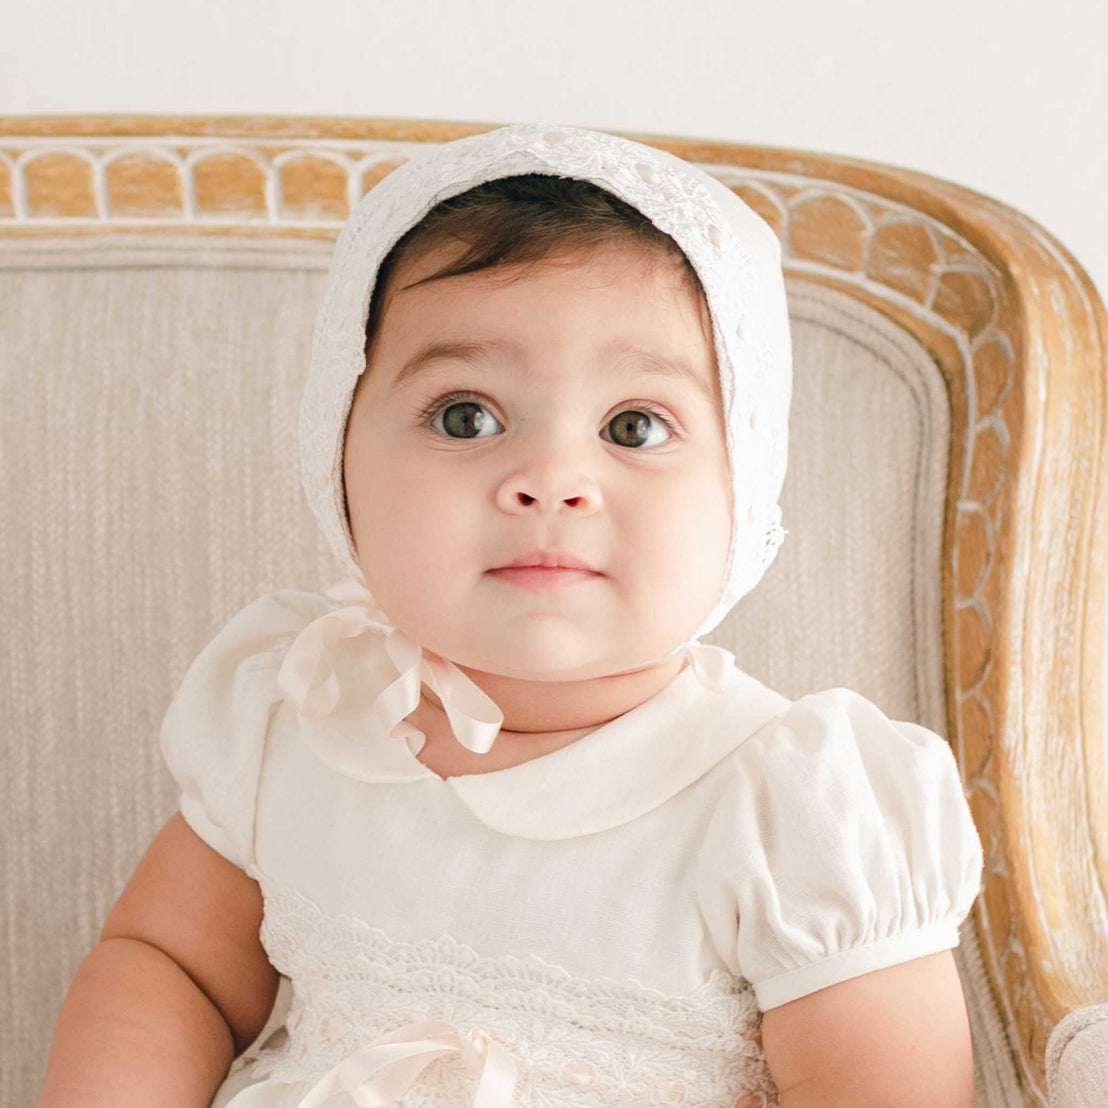 A baby with big eyes and a slight smile, dressed in the Emma lace bonnet, sitting on an antique chair.